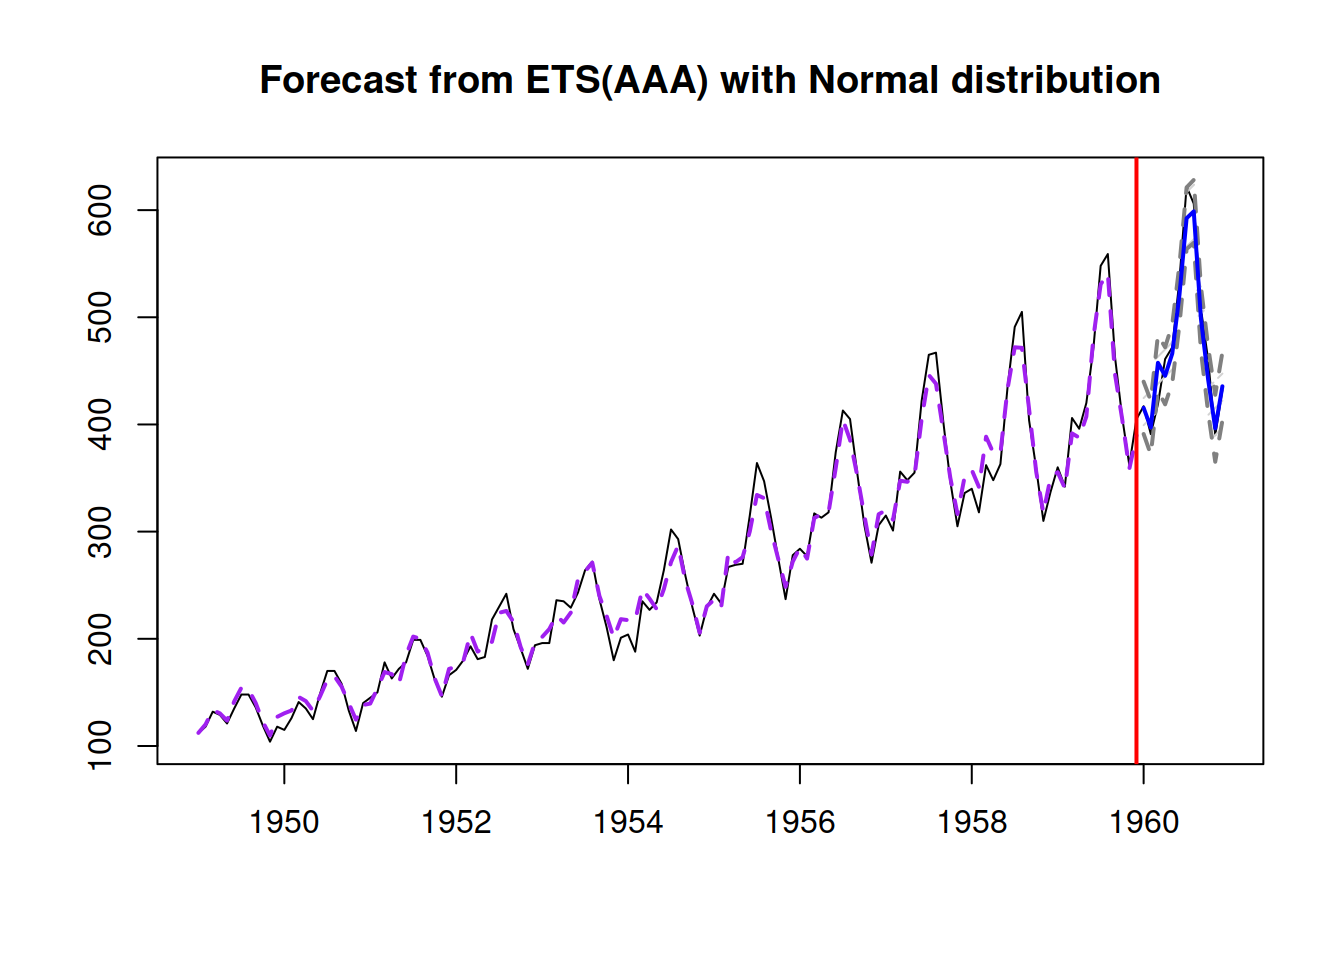 Forecast for air passengers data using an ETS(A,A,A) model.